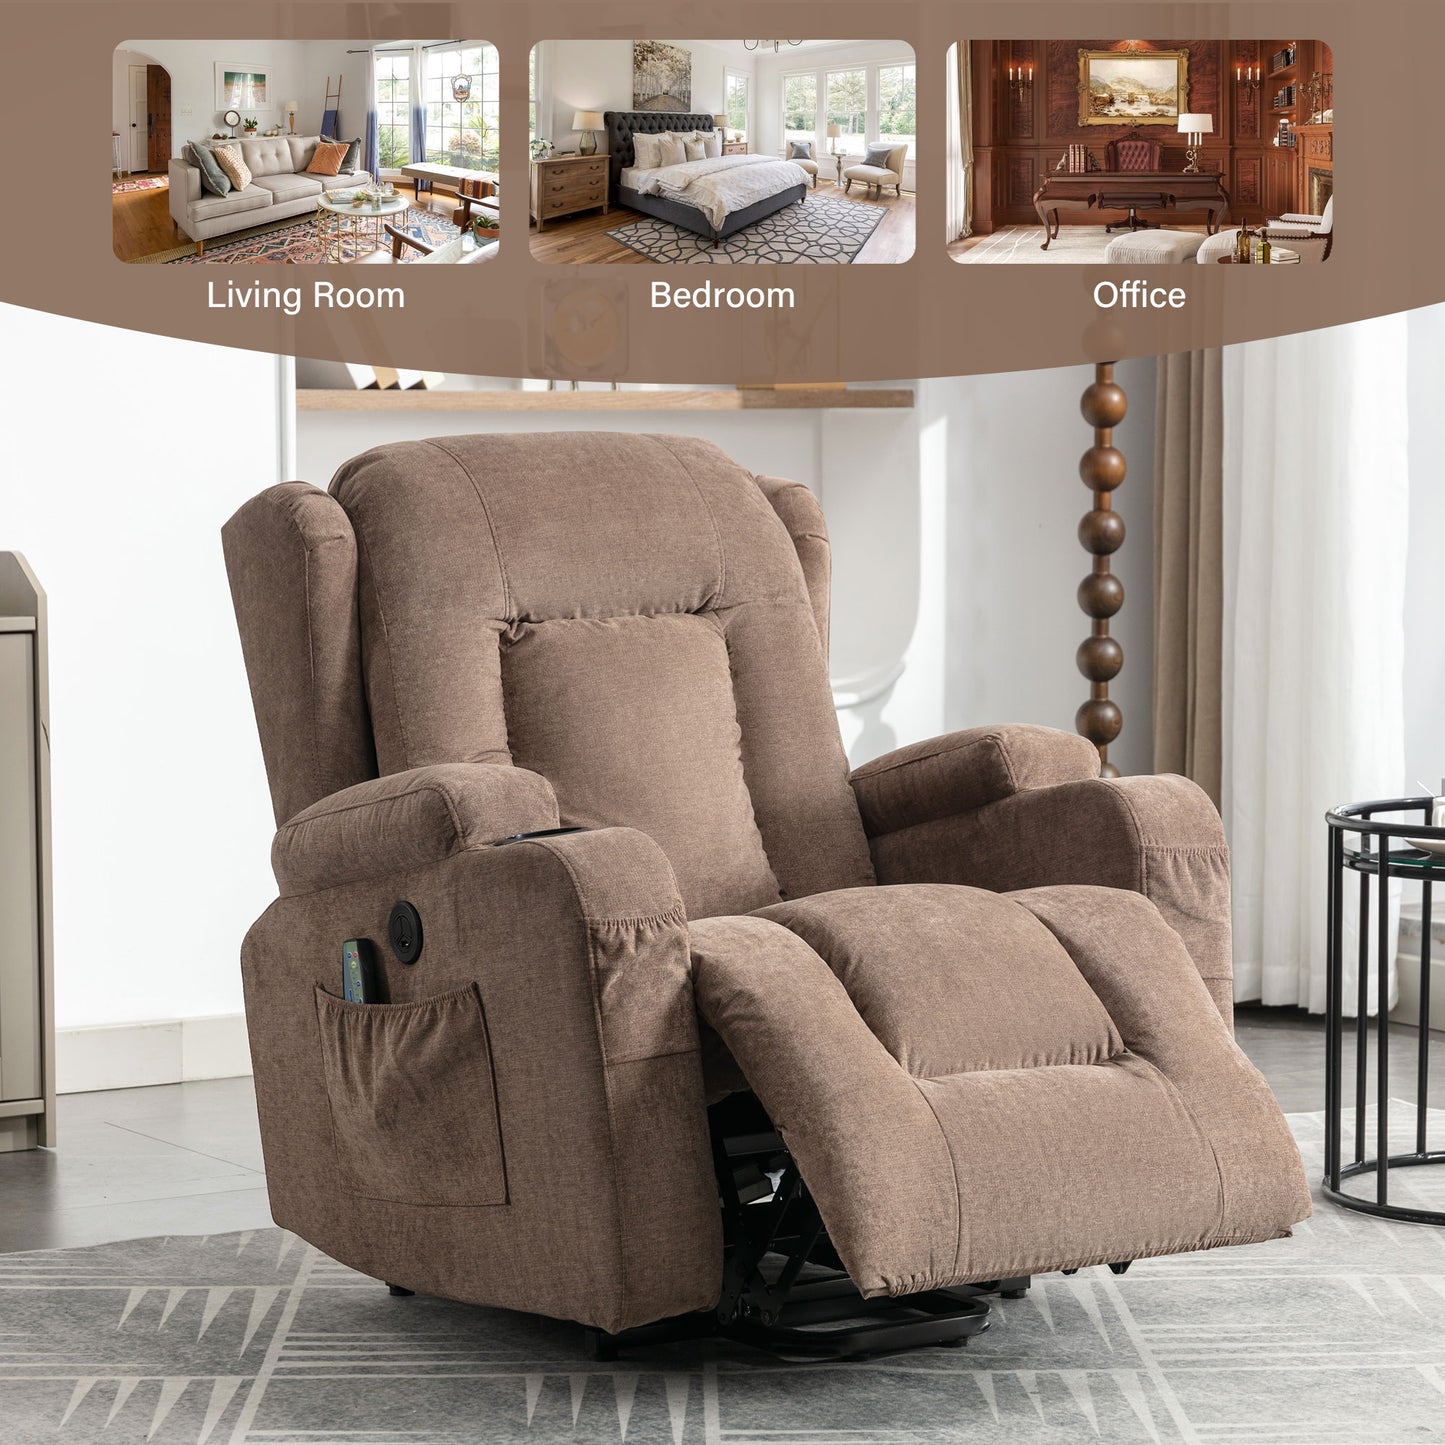 Power Lift Recliner Chair, Electric Elderly Sofa with Heat and Massage Function, Heavy Duty Reclining Mechanism with USB Charge Port, Cup Holders, Side Pockets for Living Room Home Theater, Brown